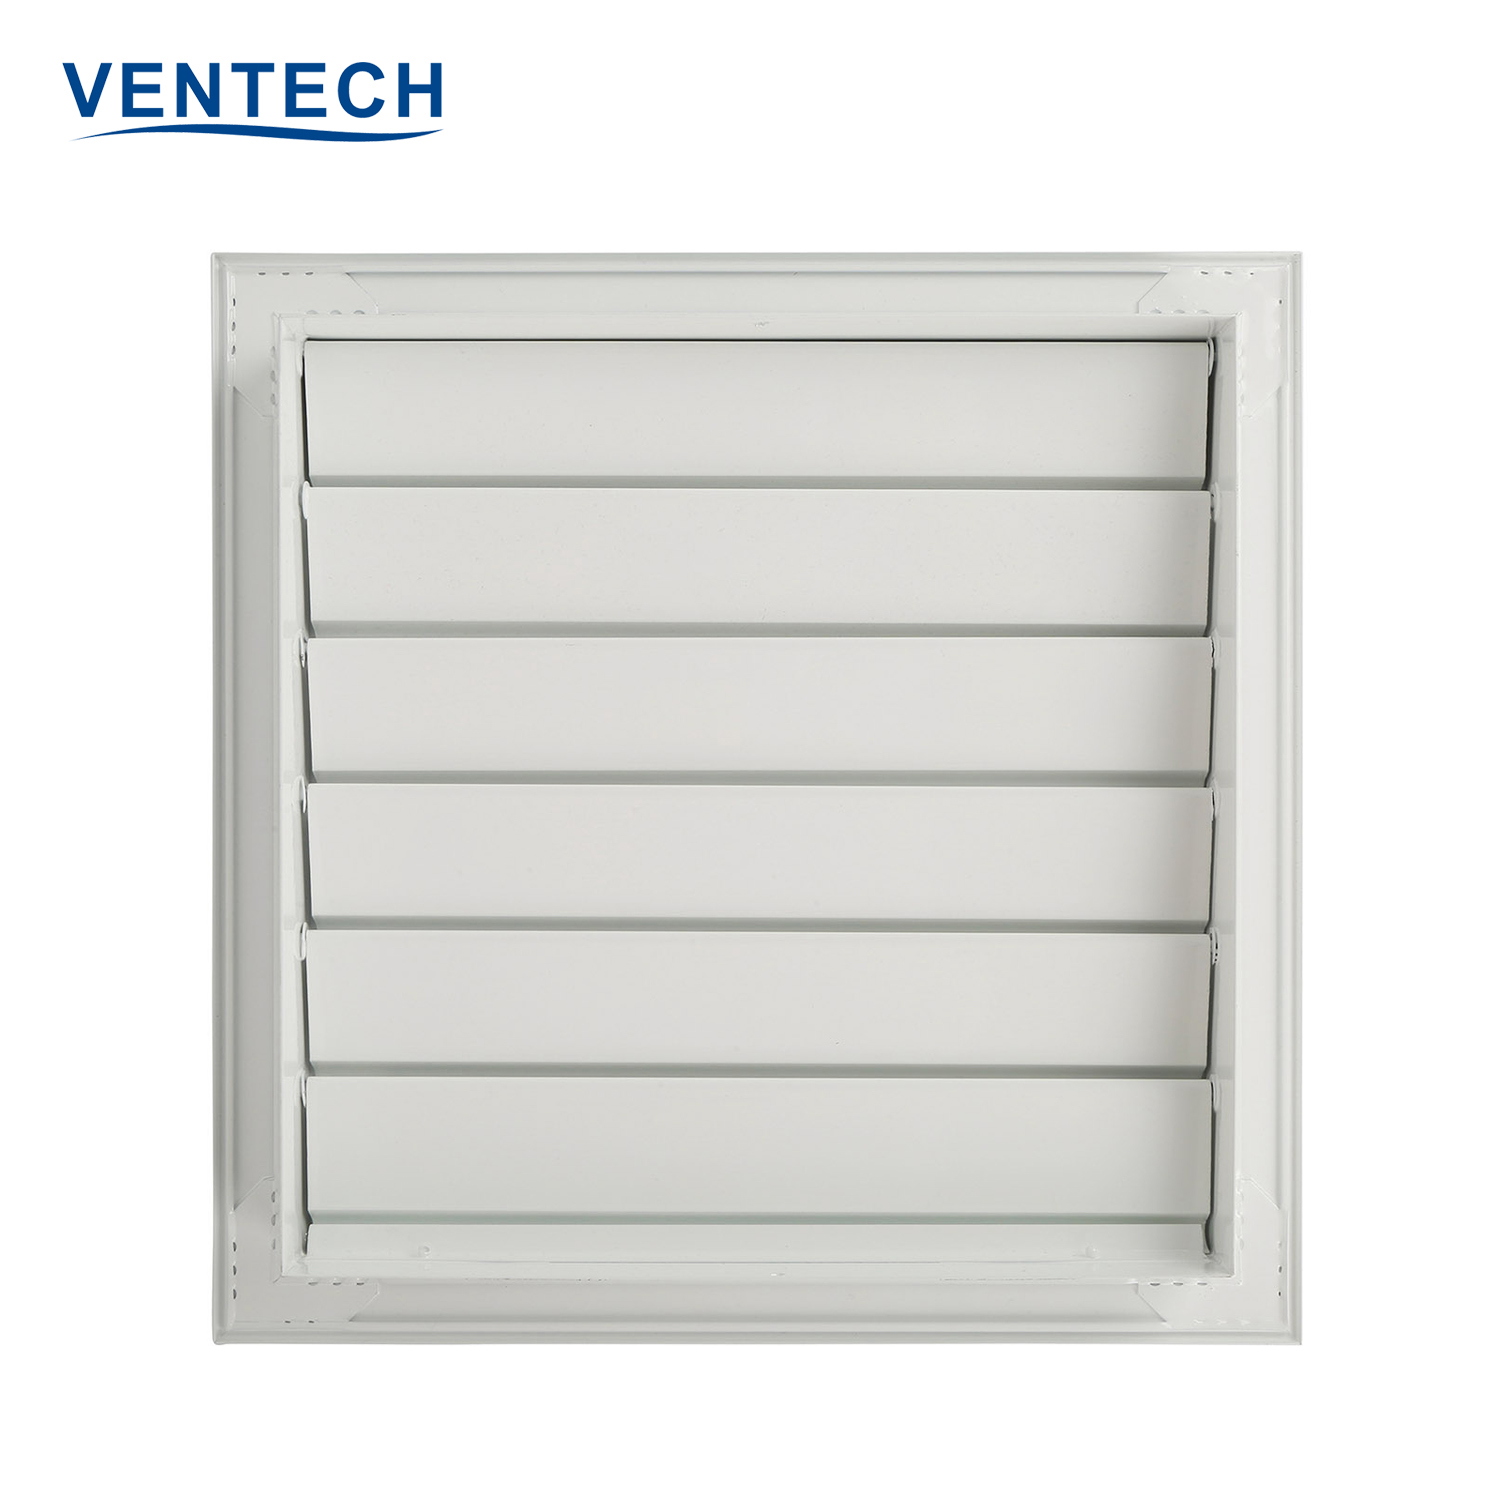 Ventech air intake louver company for office budilings-1